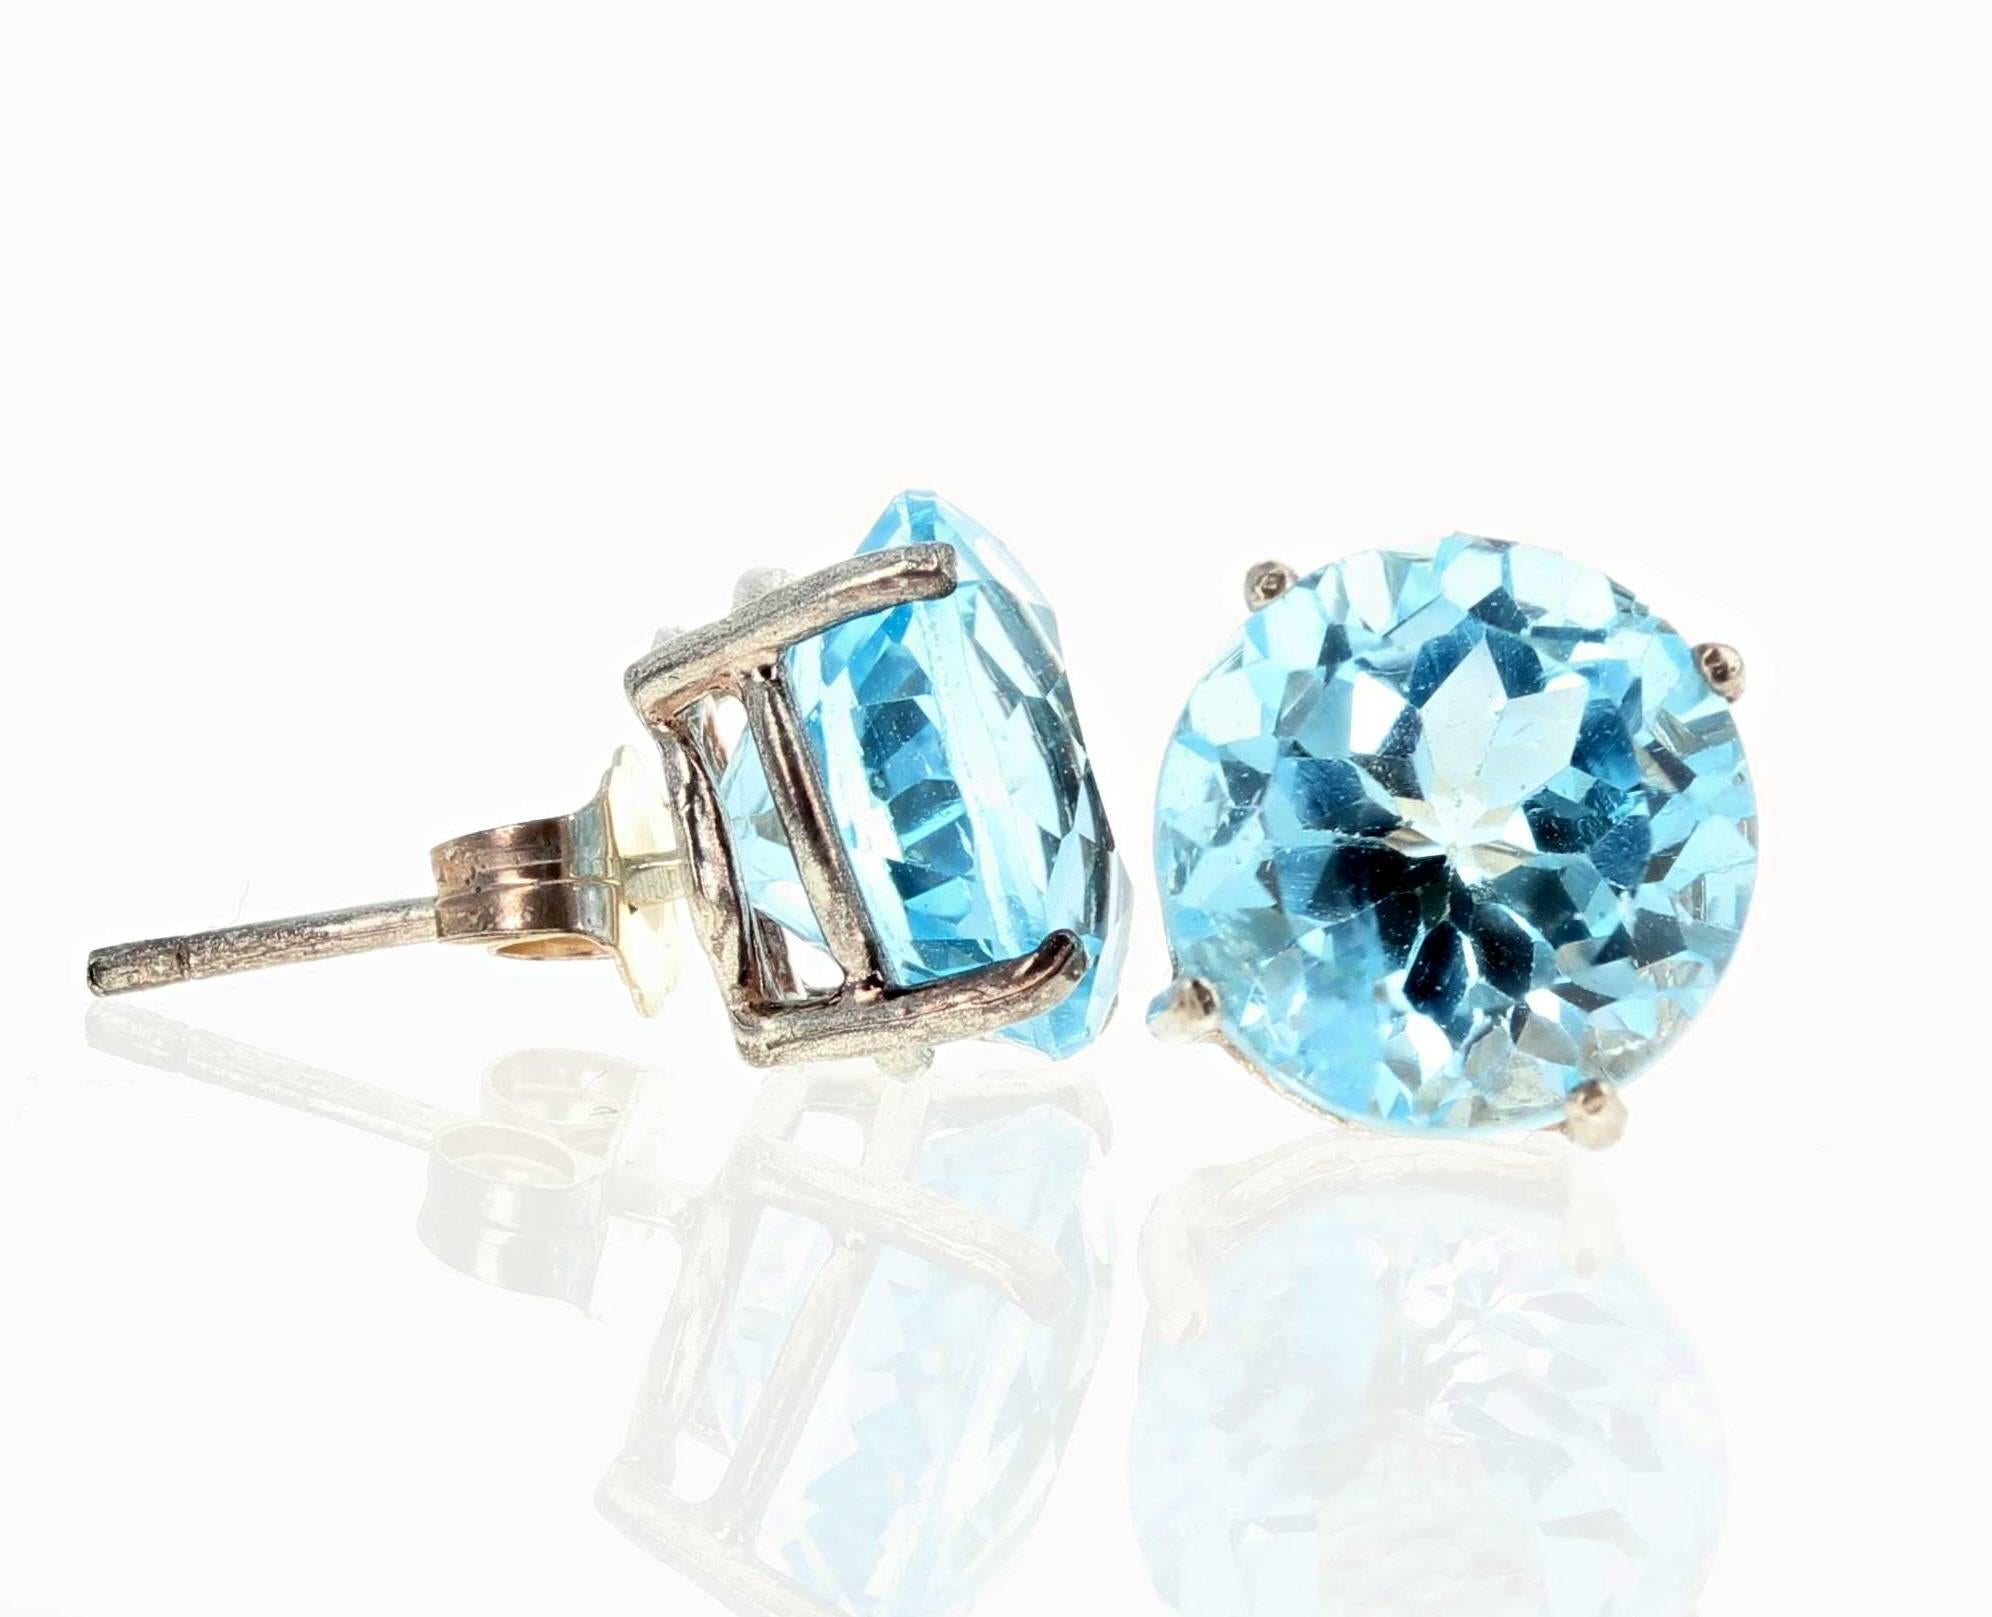 37 Carat Blue Topaz Sterling Silver Ring and Stud Earrings 5